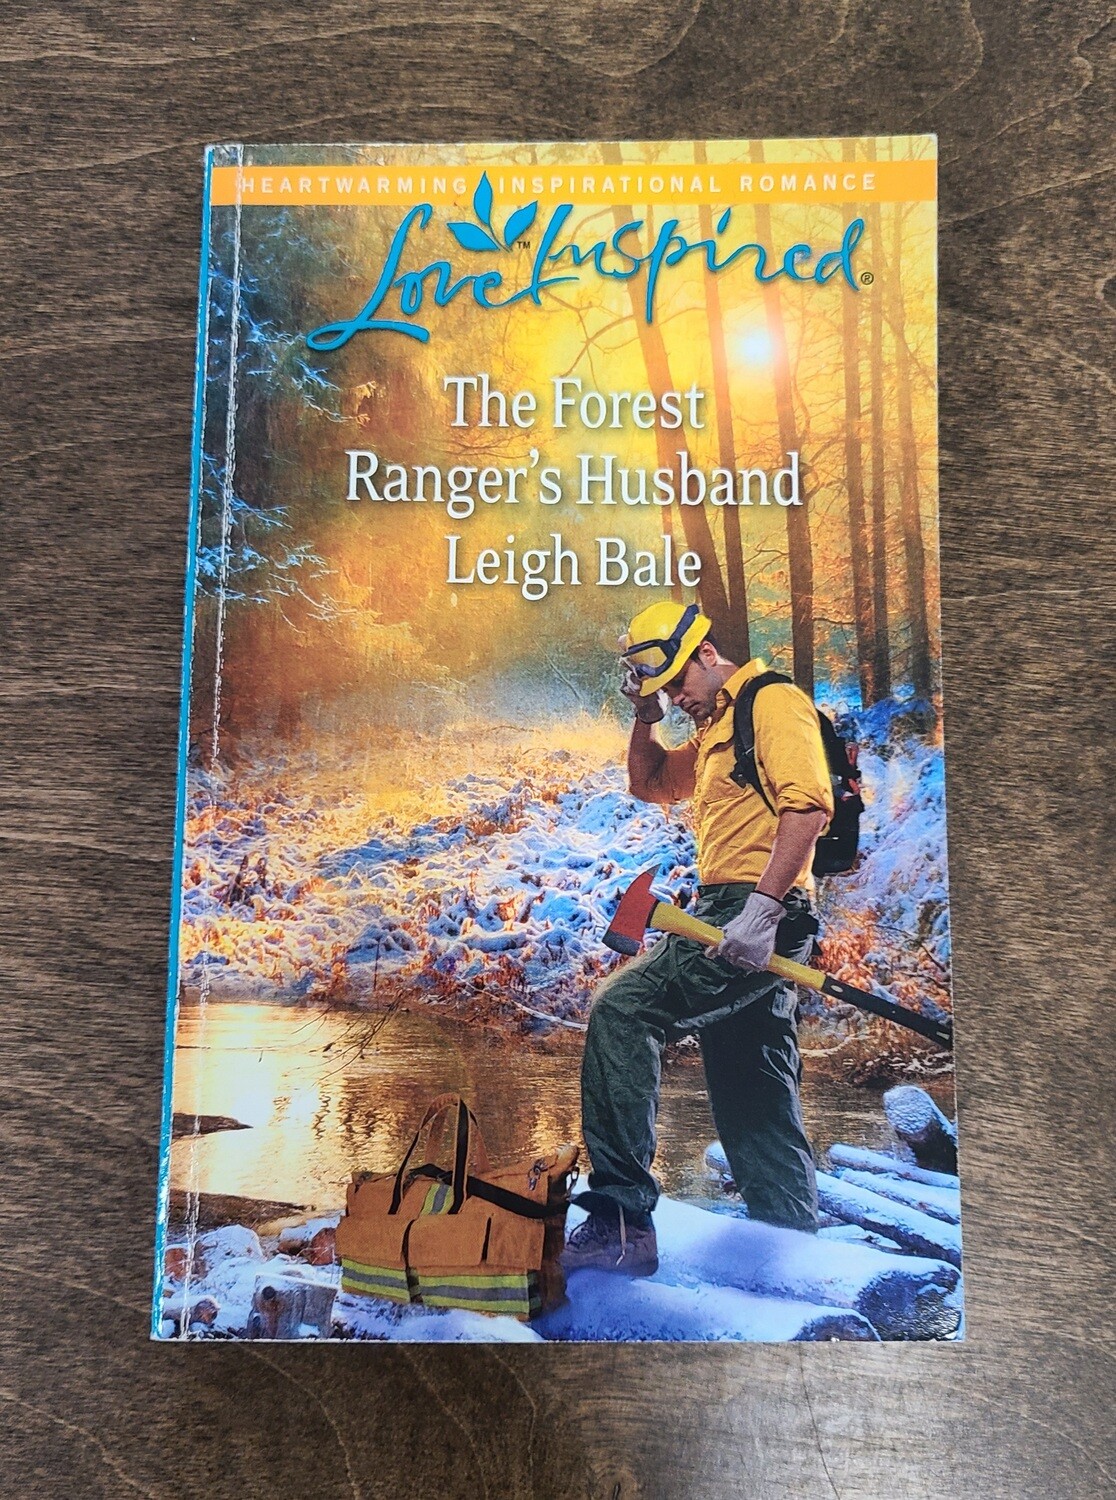 The Forest Ranger's Husband by Leigh Bale